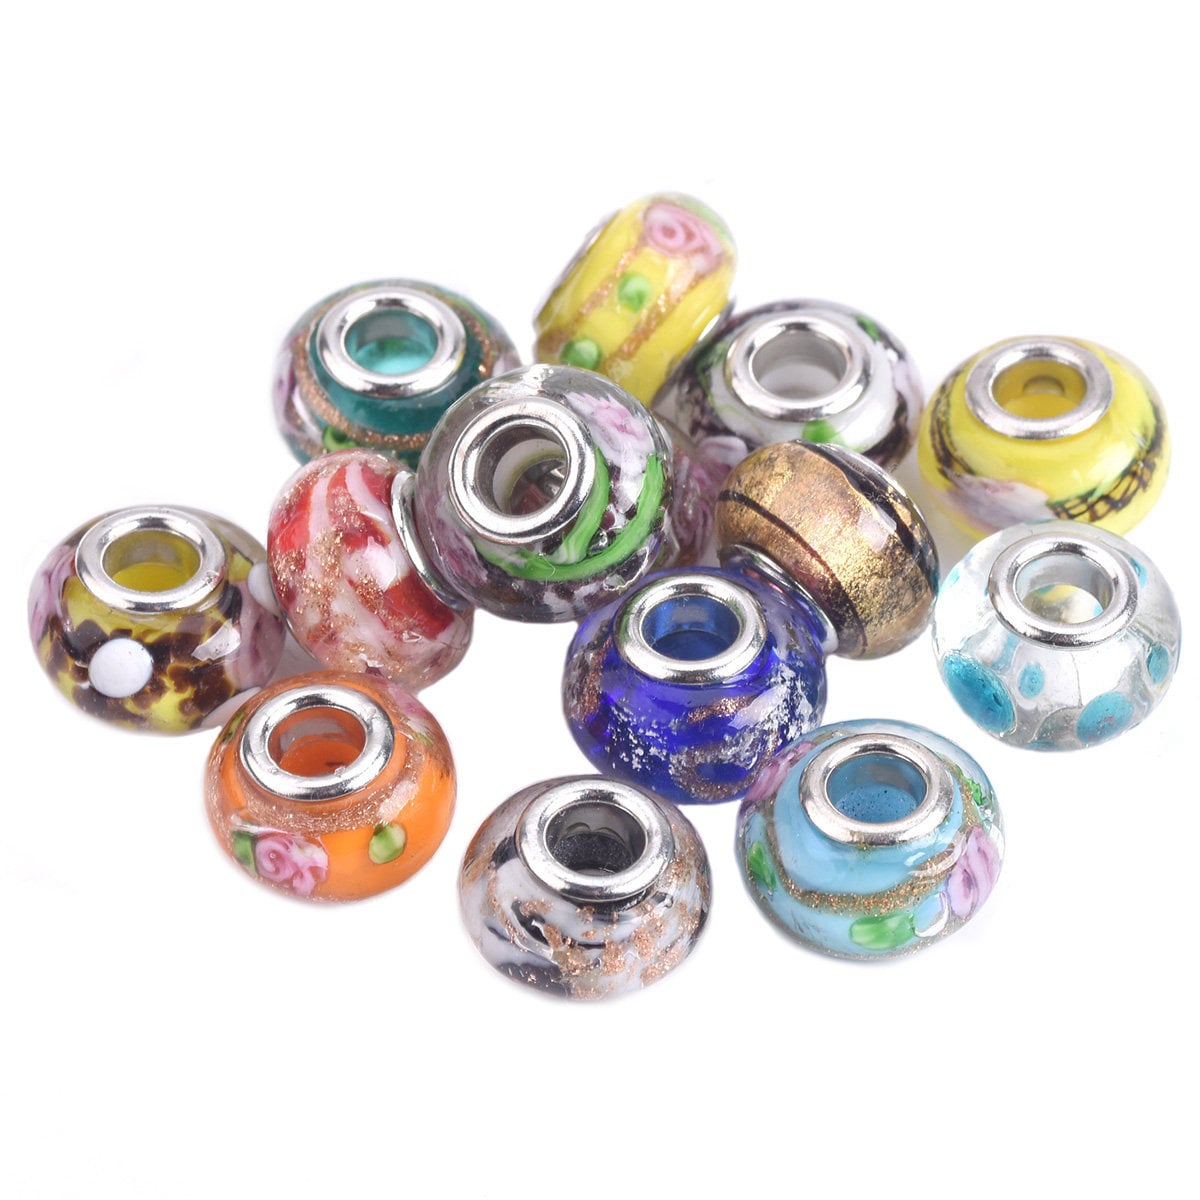 5pcs Flower Petals Crystal Glass Loose Beads Pendants Jewelry Charms DIY 